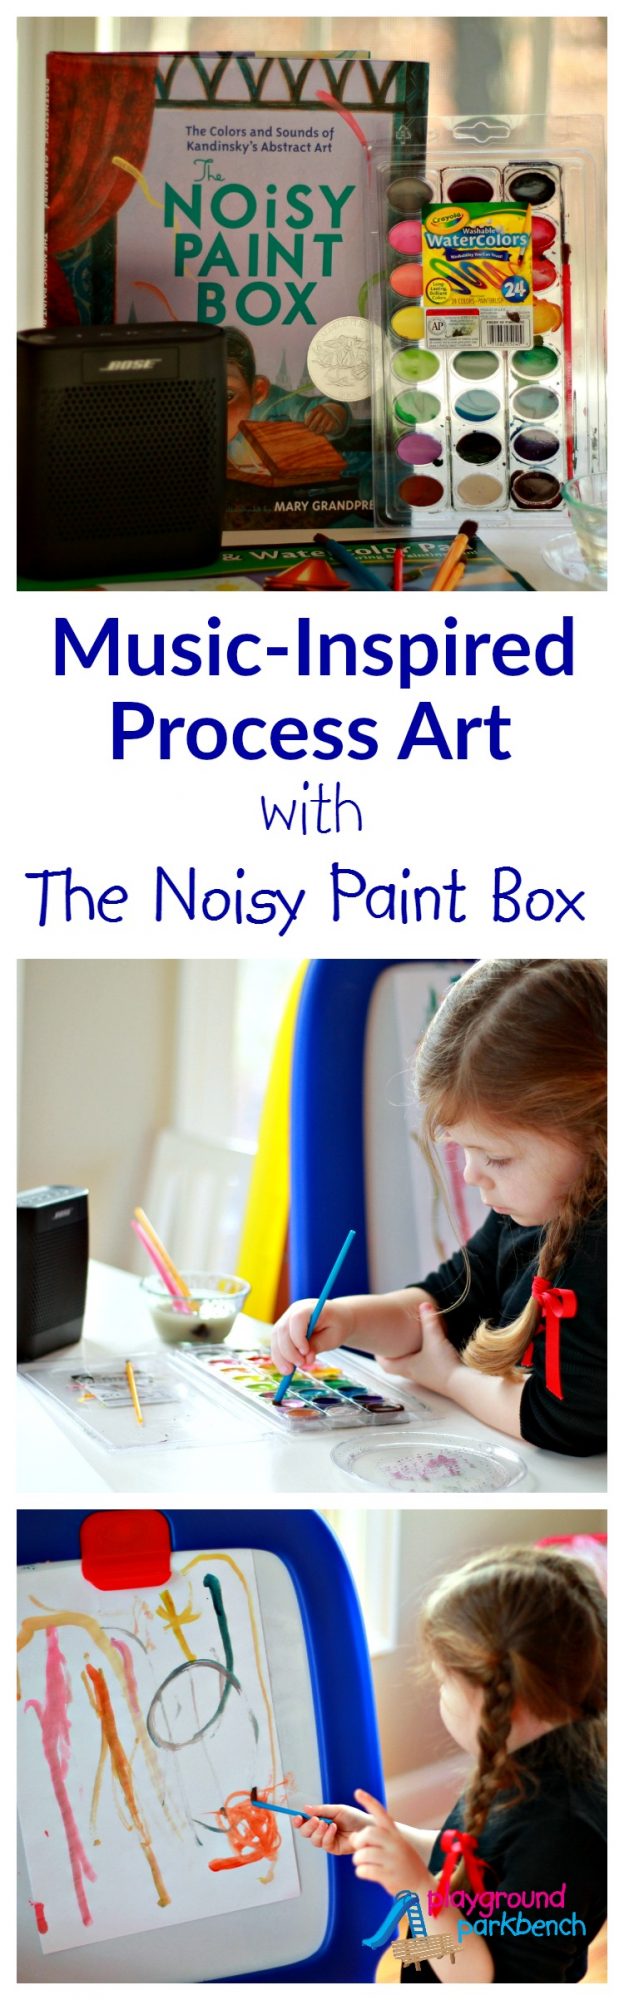 Music-Inspired Process Art with Kandinsky and The Noisy Paint Box